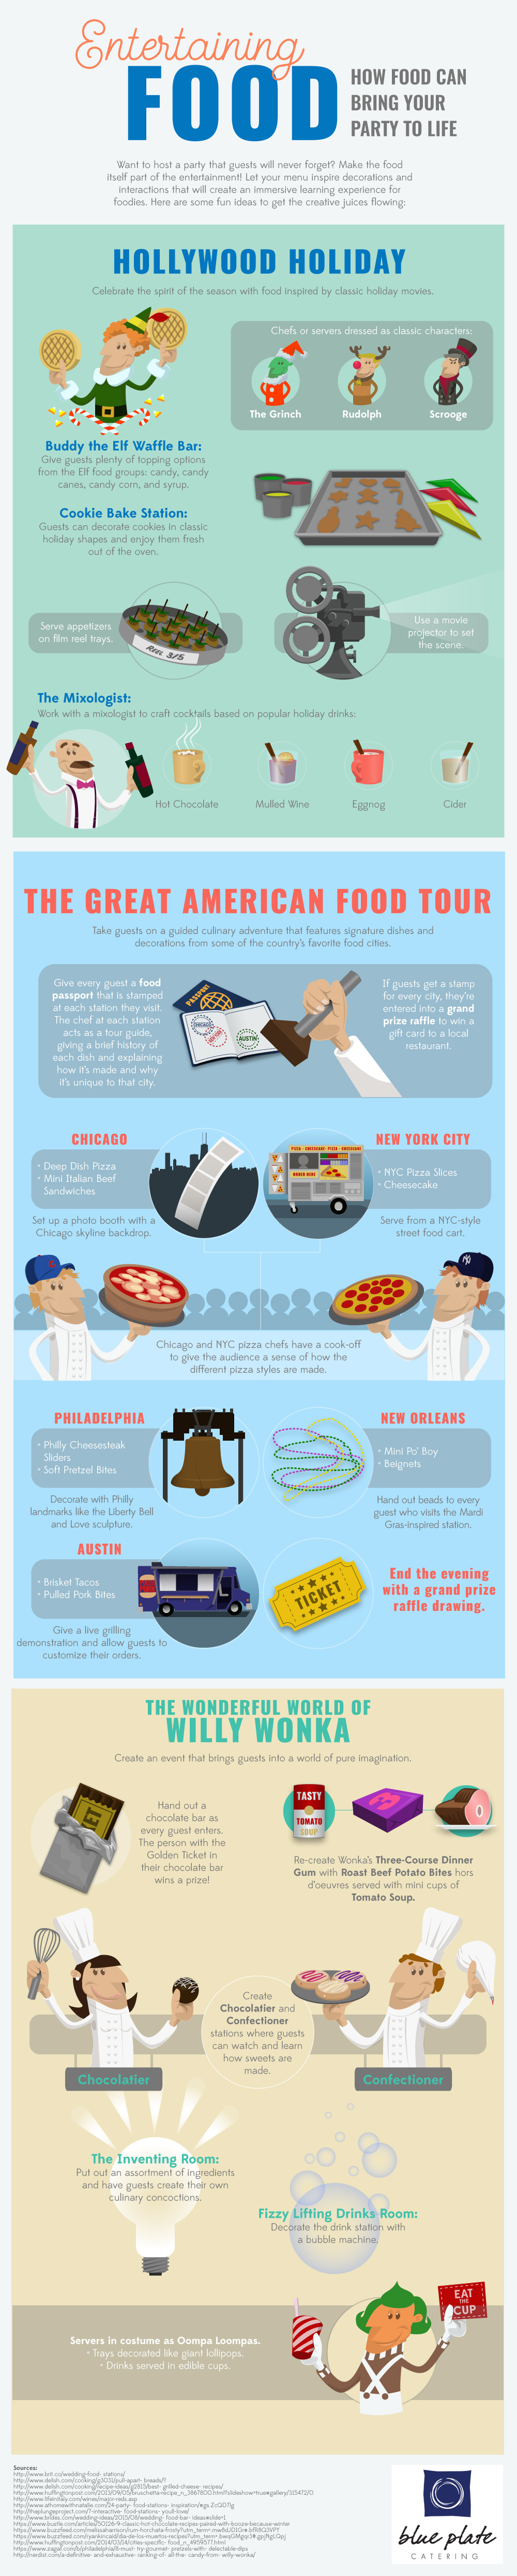 food-as-entertainment-infographic